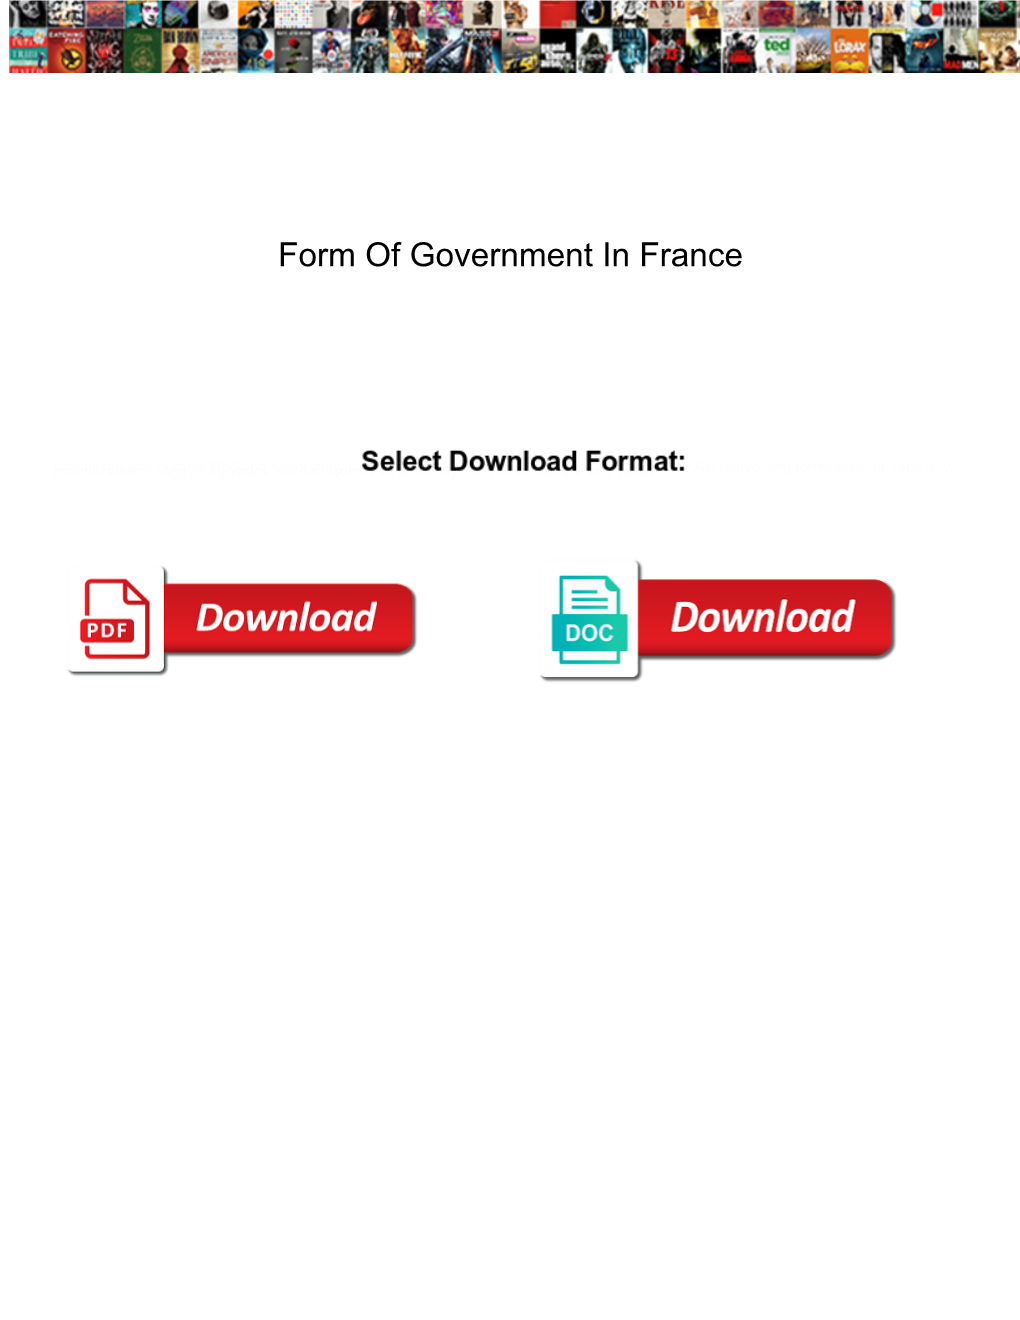 Form of Government in France